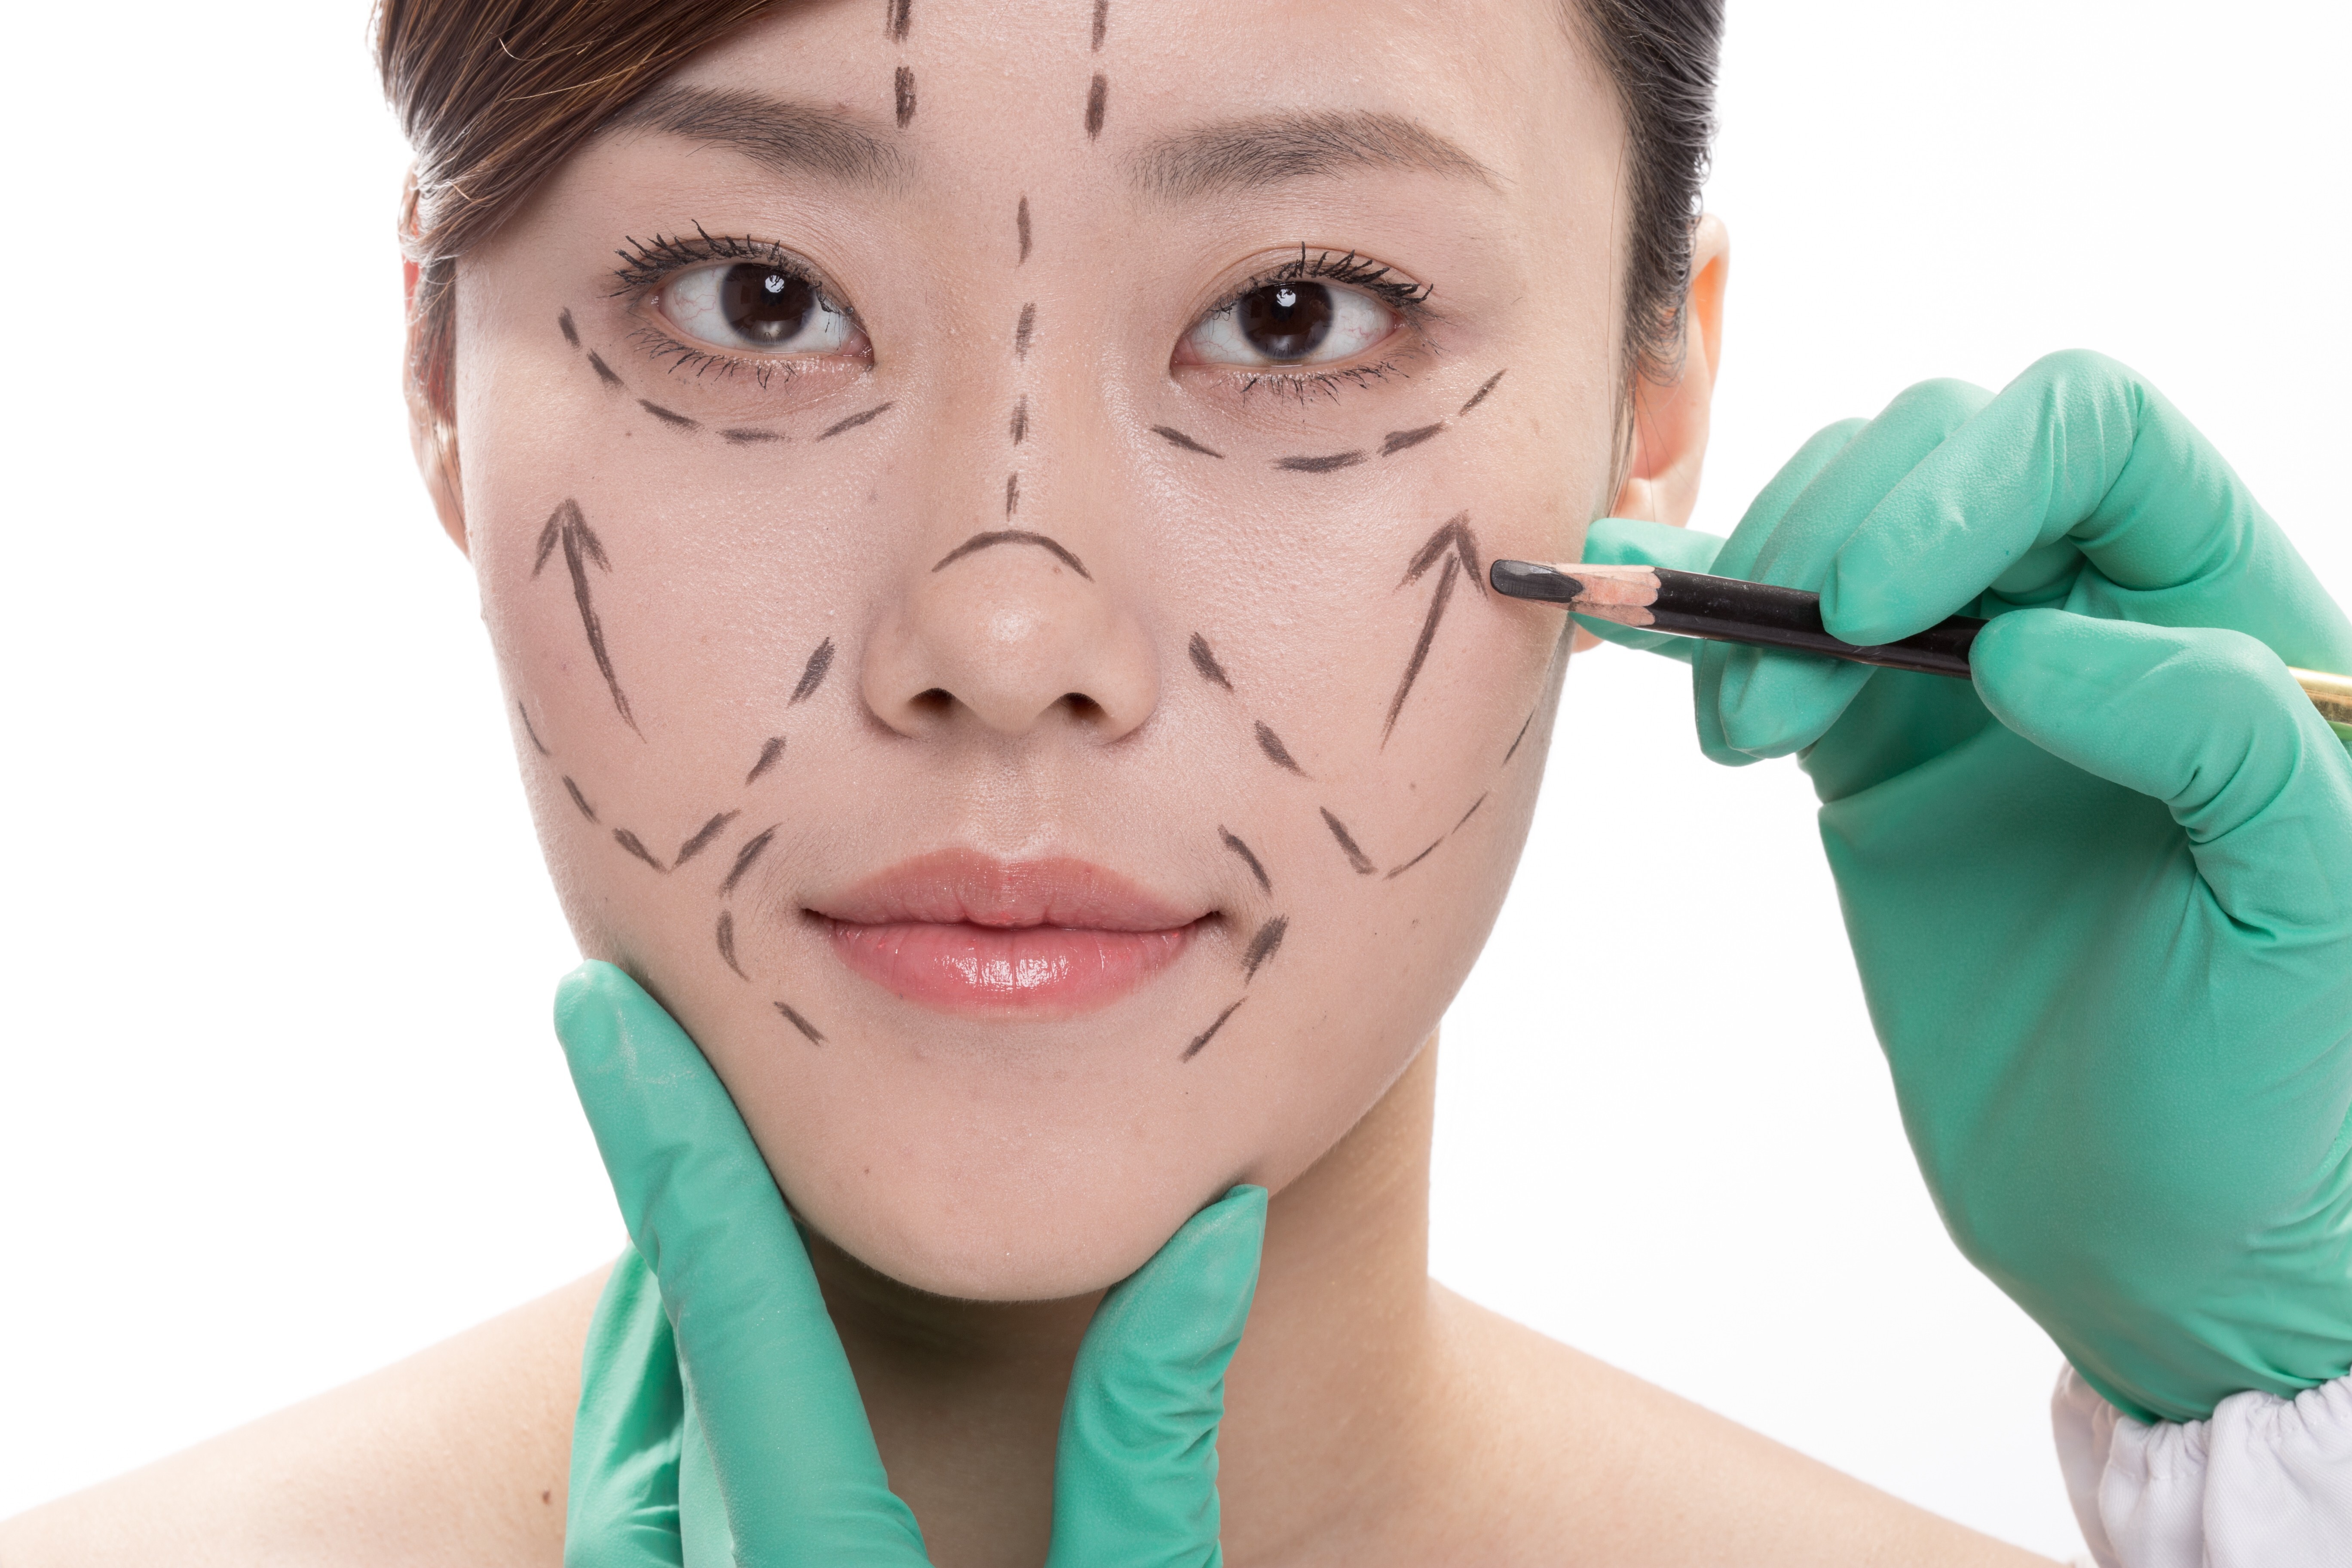 A surgeon prepares to perform cosmetic surgery. Photo: Shutterstock